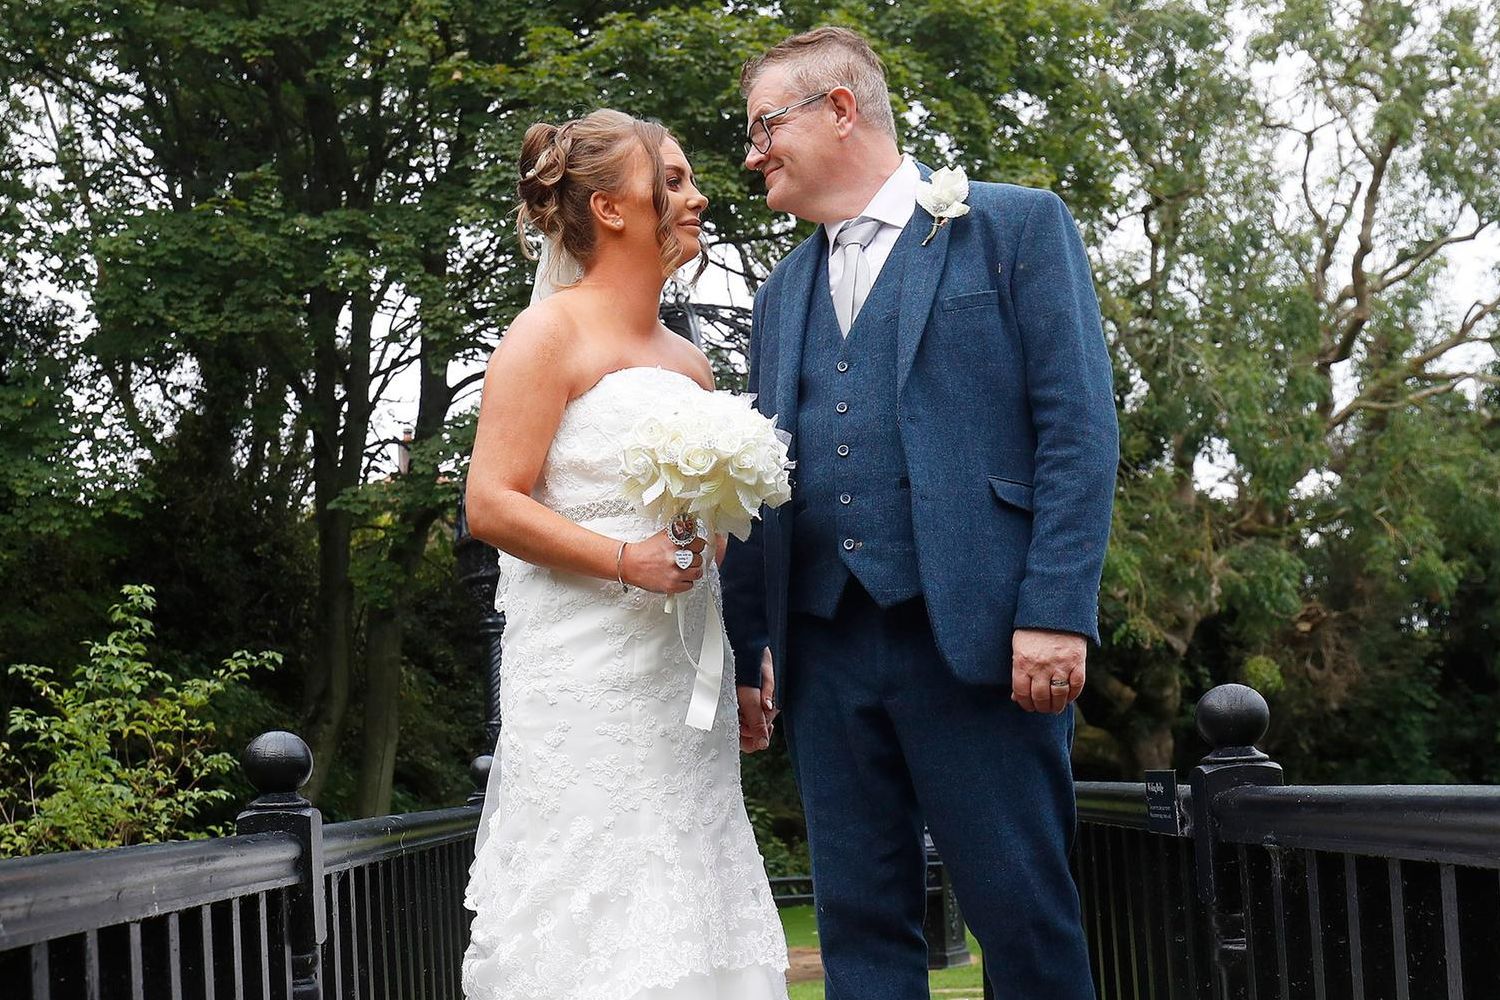 Belfast couple Clare O'Neill and Andrew Hill finally tie the knot